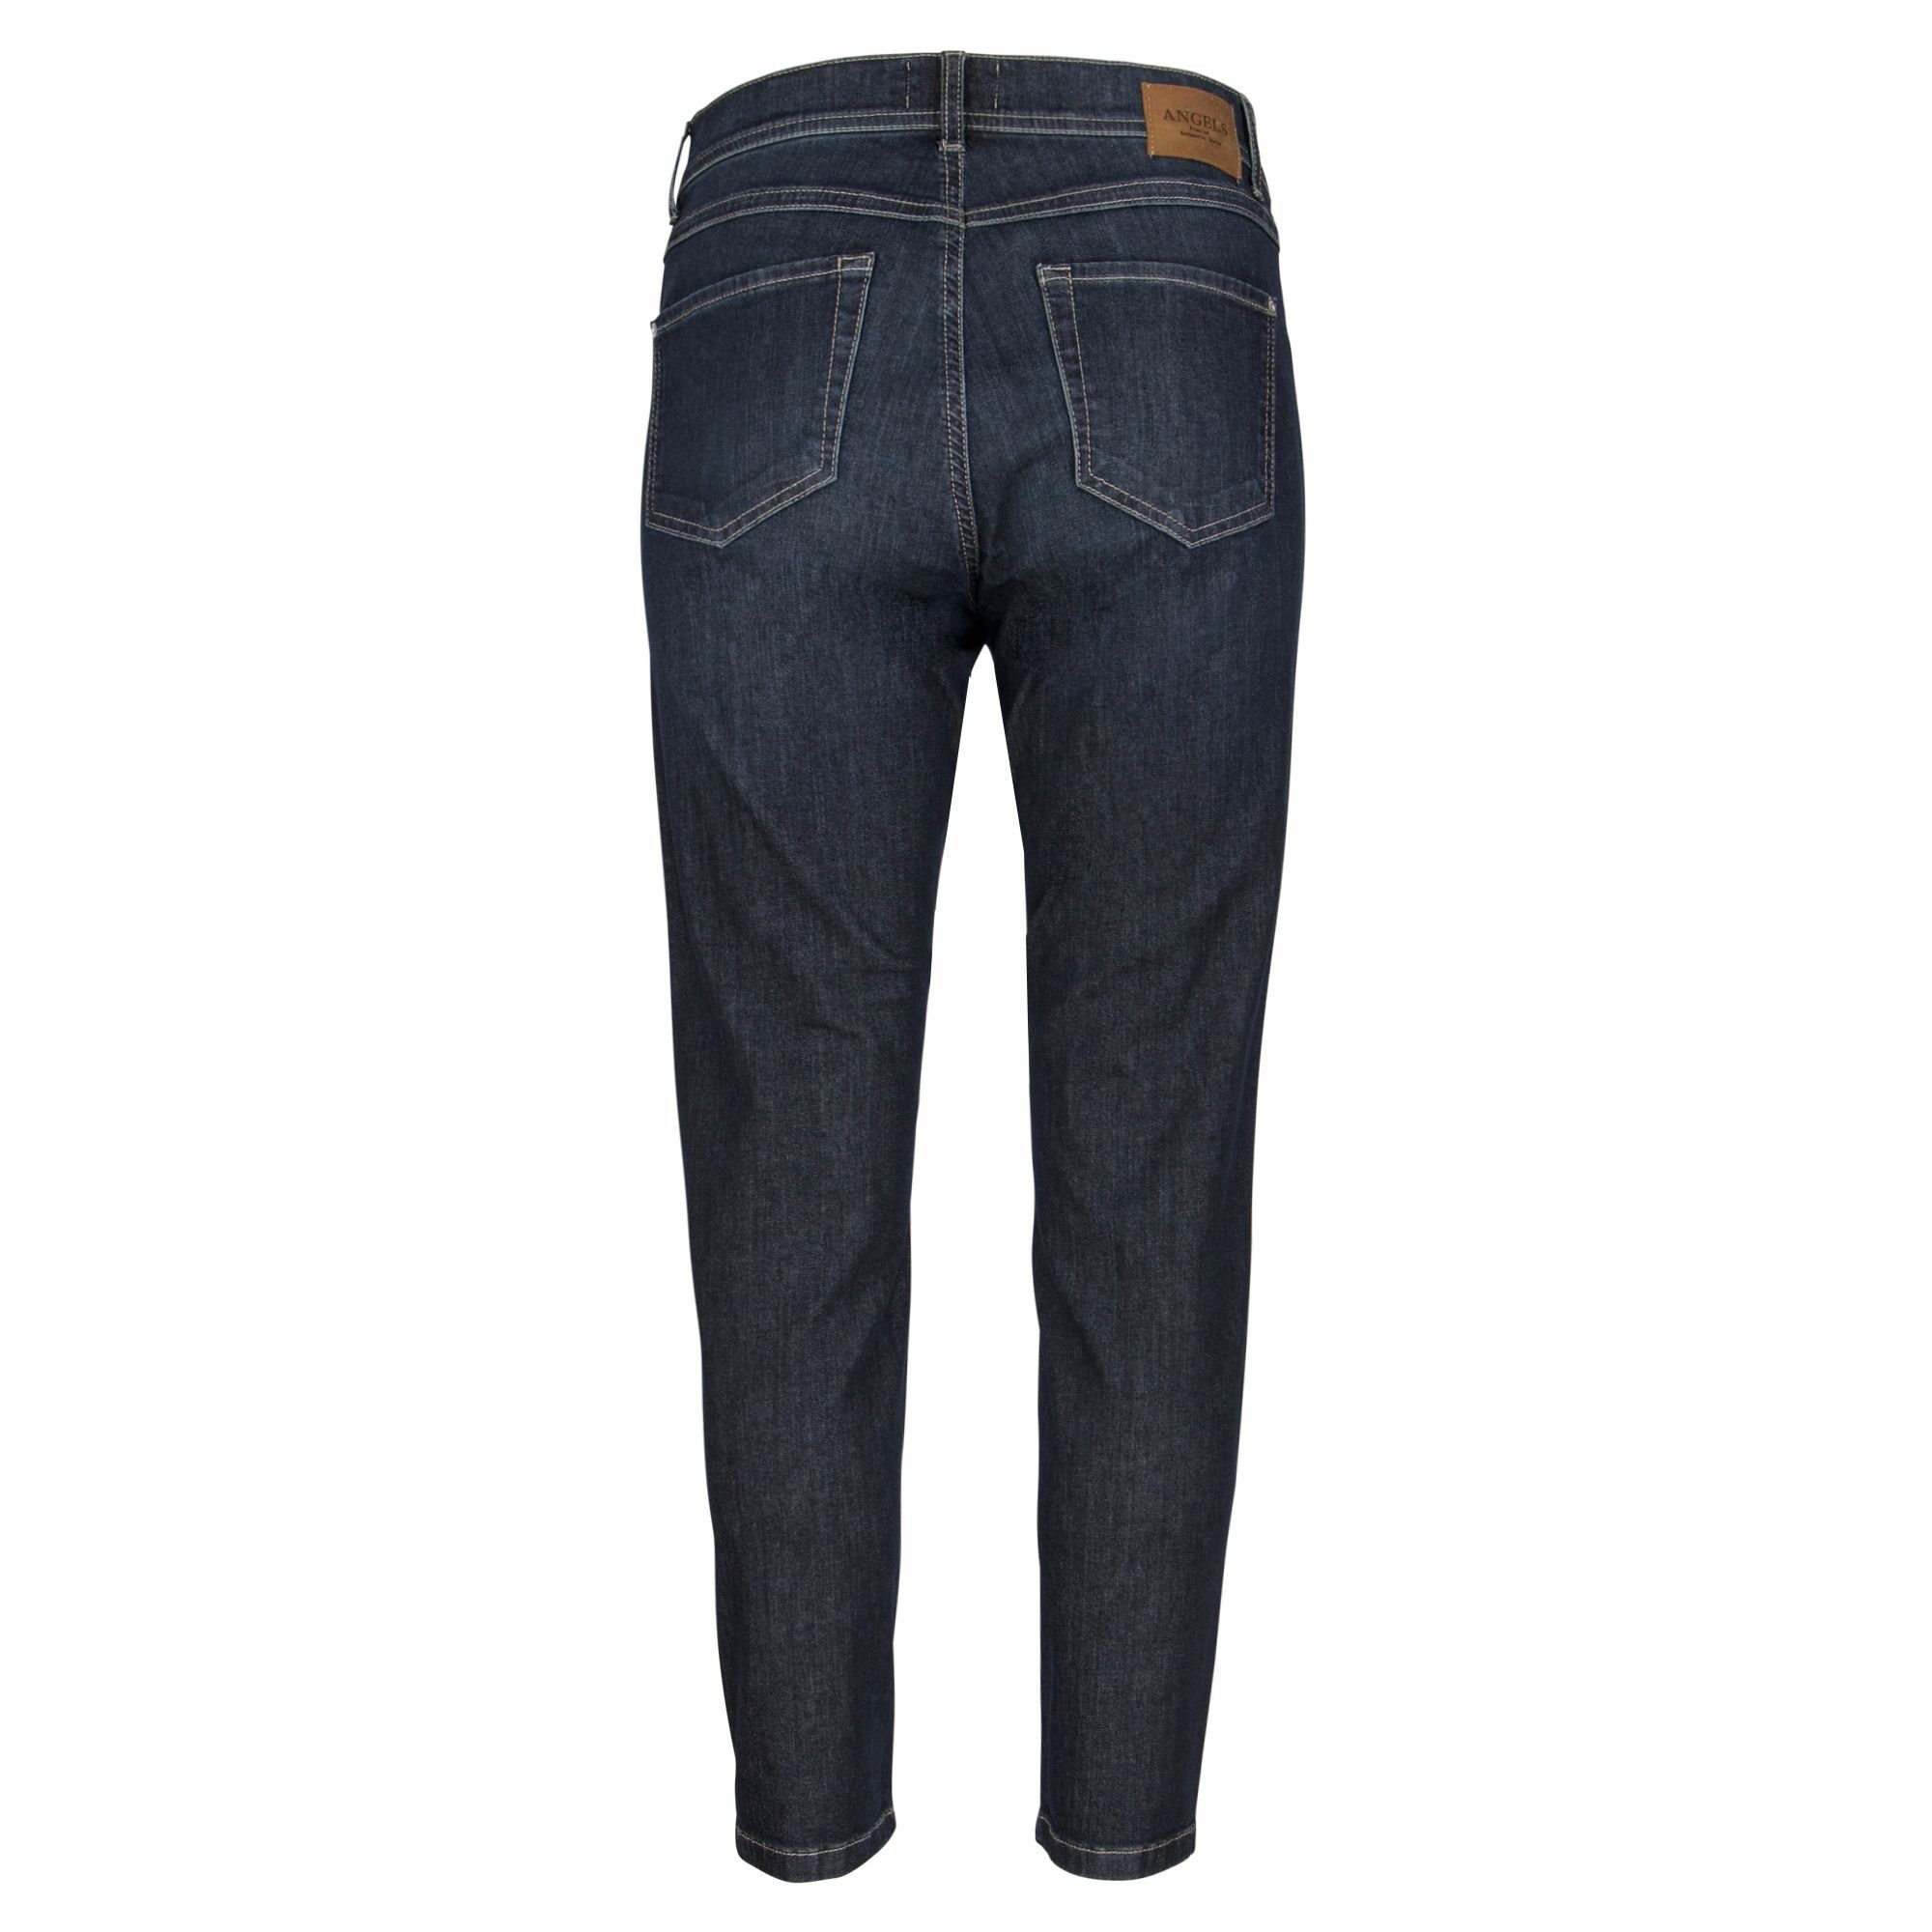 ANGELS blue 5-Pocket-Jeans used rinse night